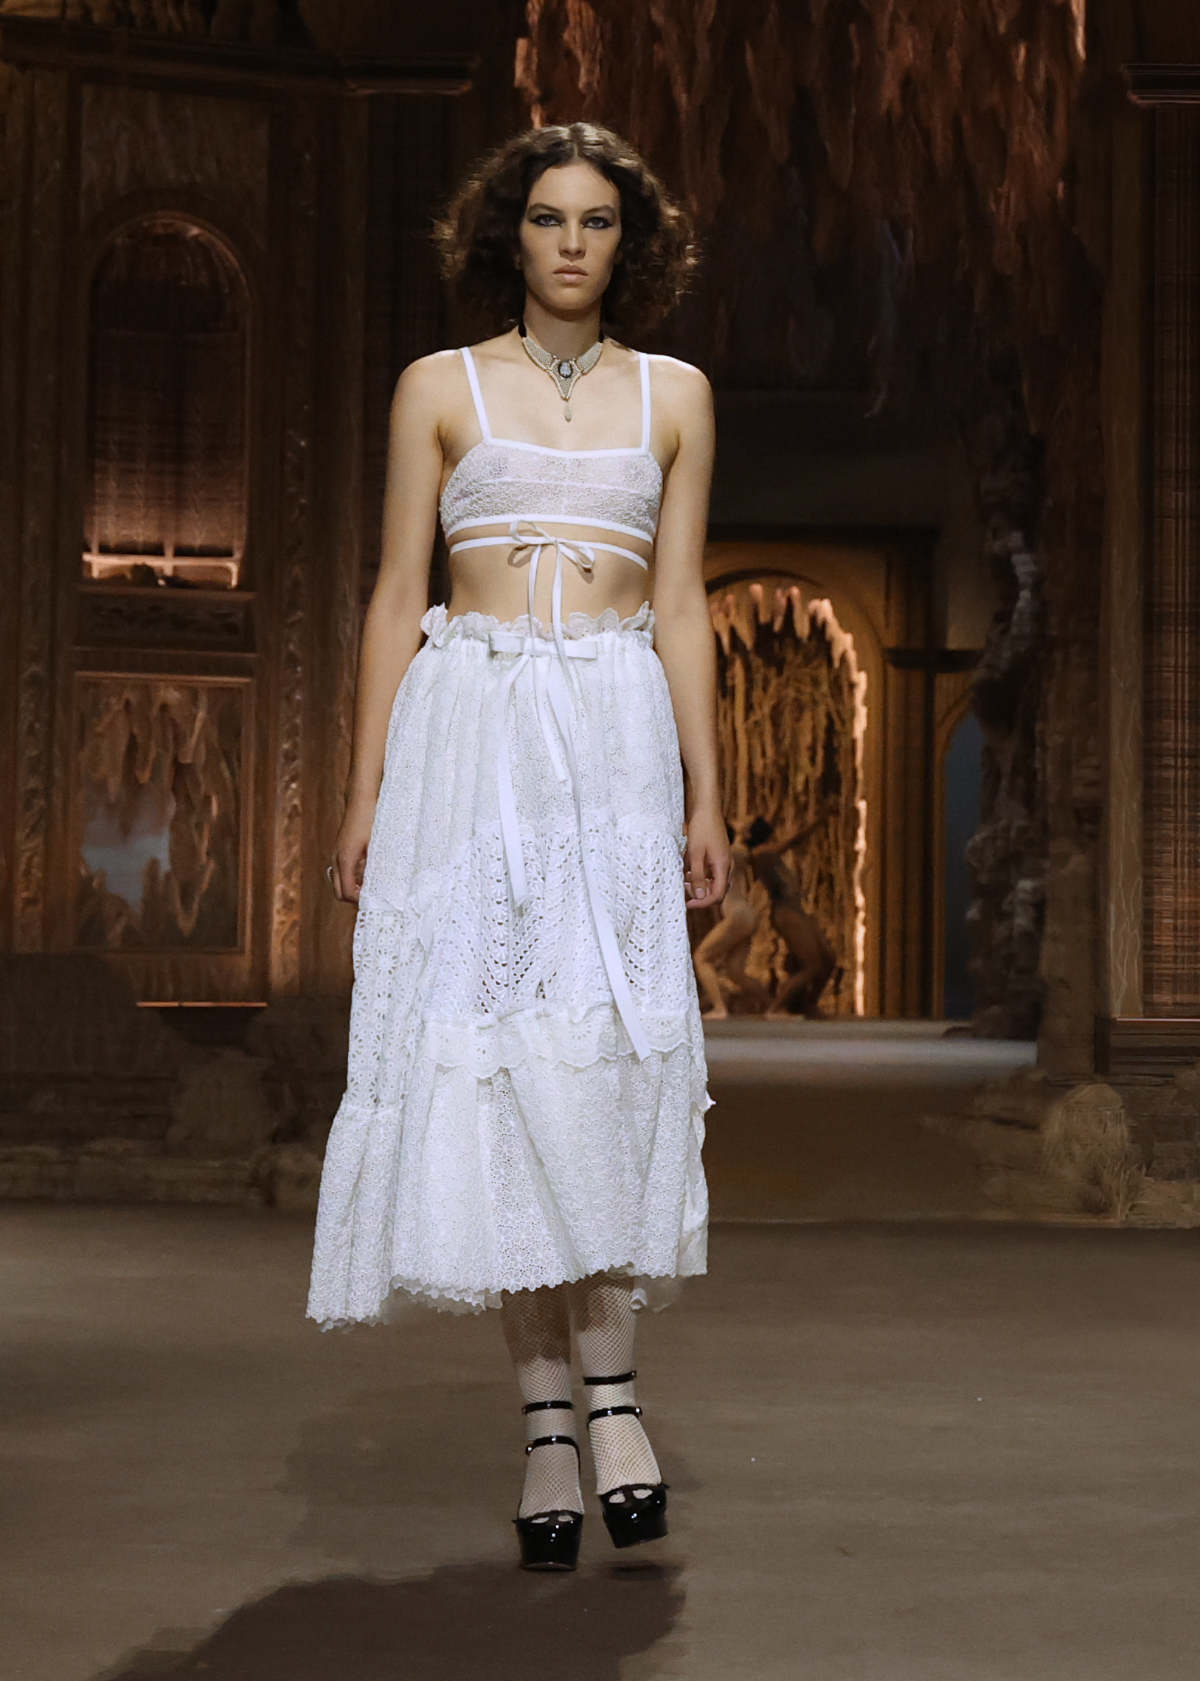 Dior Presents Its New Spring-Summer Women's 2023 Ready-To-Wear Collection